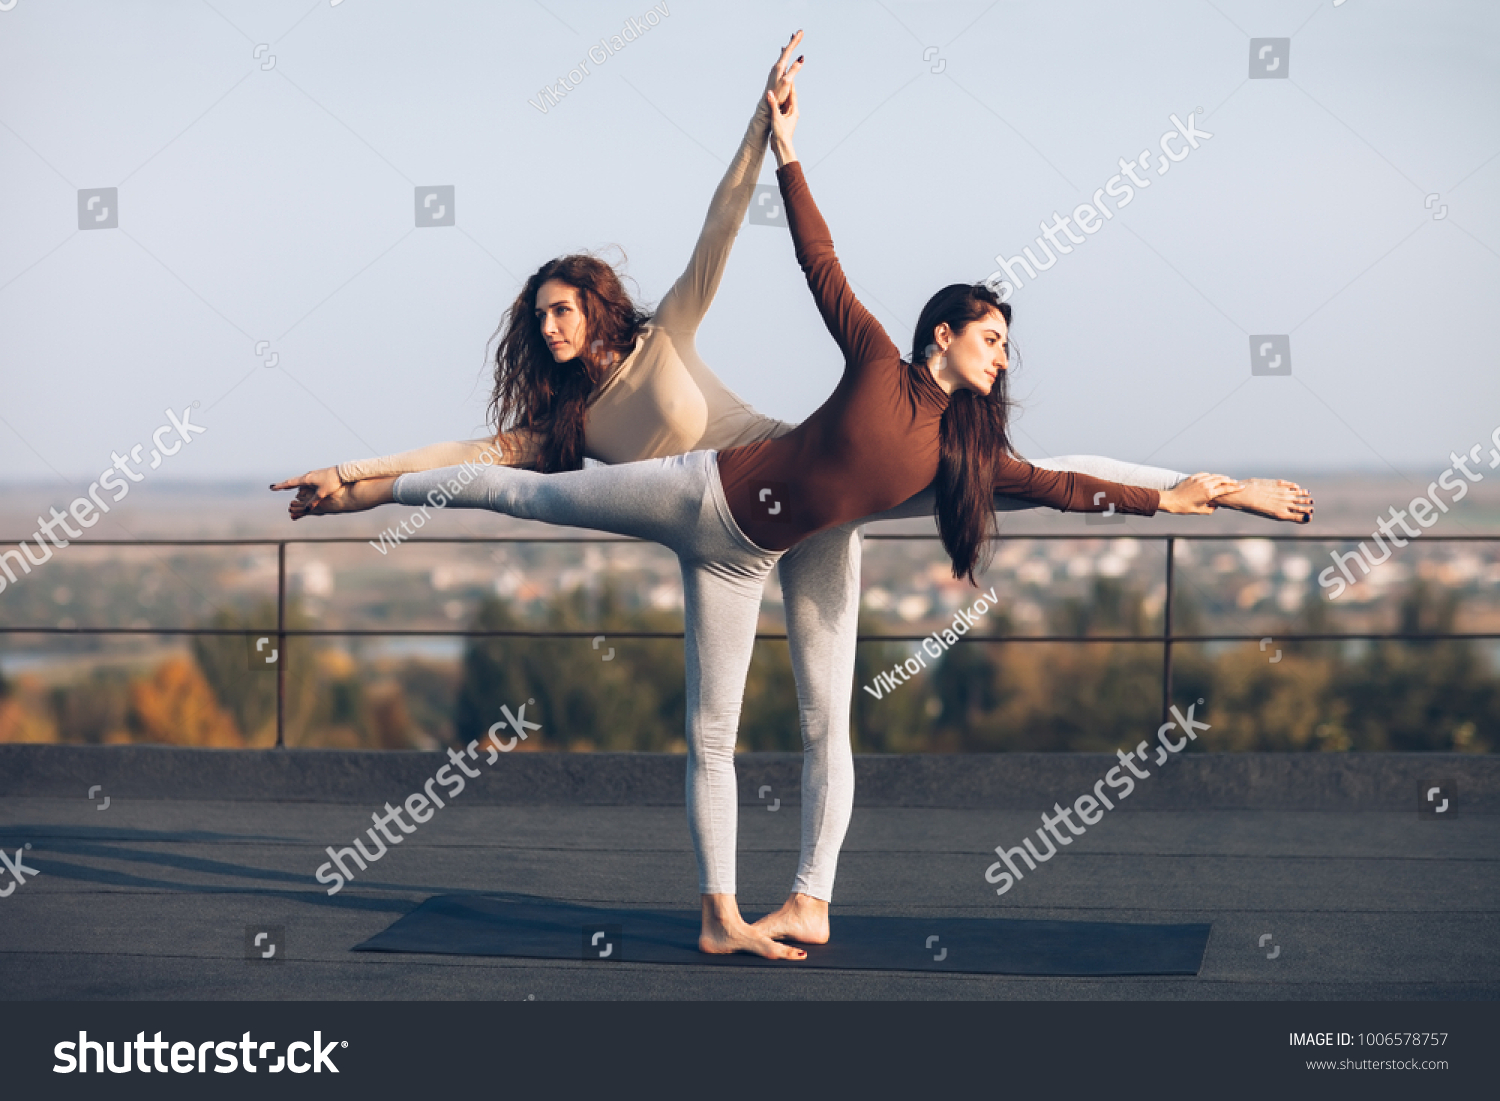 Two young beautiful women doing yoga asana virabhadrasana helping each other on the roof outdoor. partner yoga. Balance, concentration, equilibrium concept #1006578757